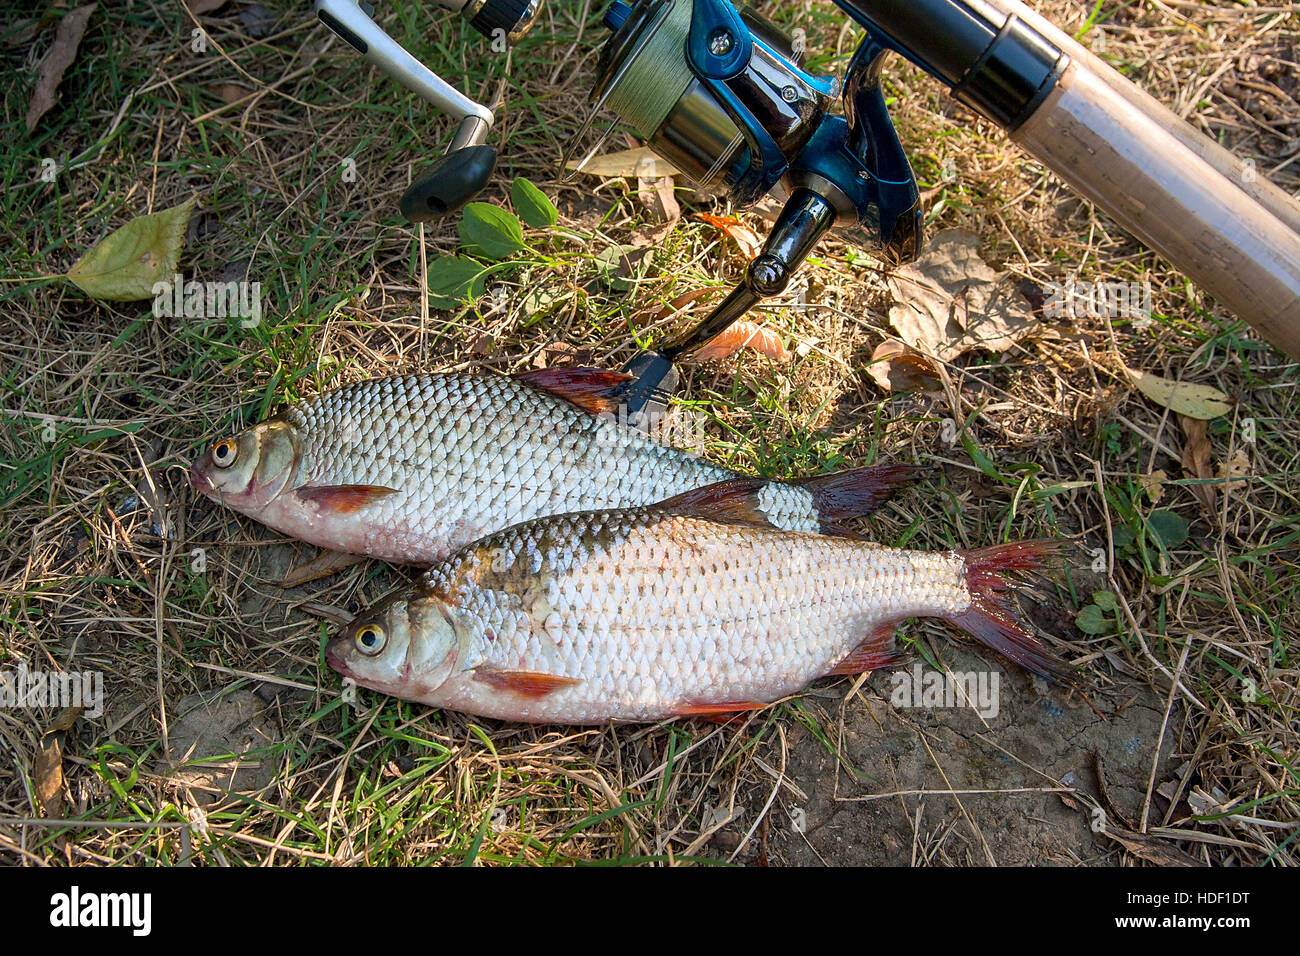 Premium Photo  Catching freshwater fish and fishing rods with